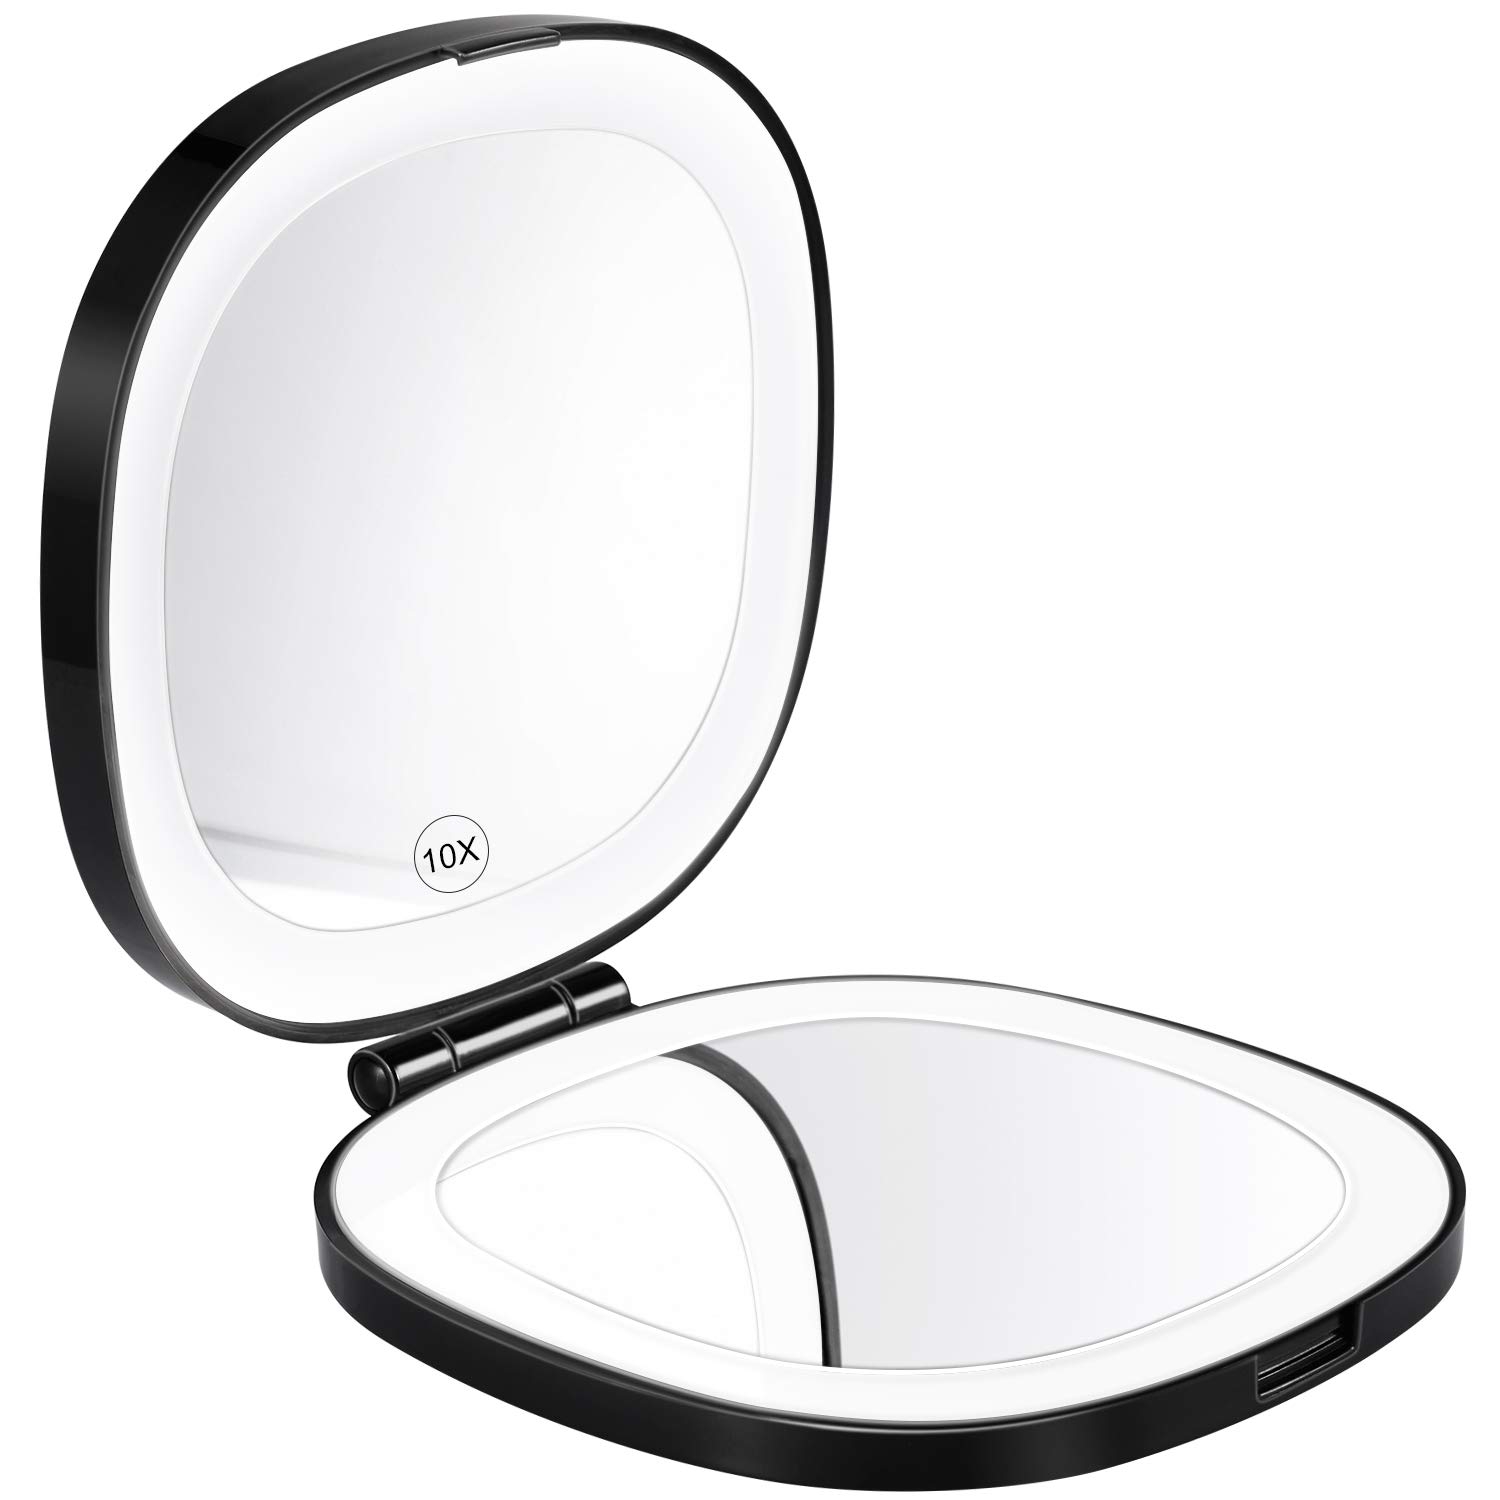 KEDSUM Lighted Travel Makeup Mirror, 1X/10X Magnifying Compact Mirror with Rechargeable LED Lights, Dimmable Double Sided Folding Mirror, Portable, Large, Daylight, USB Charging (Black)